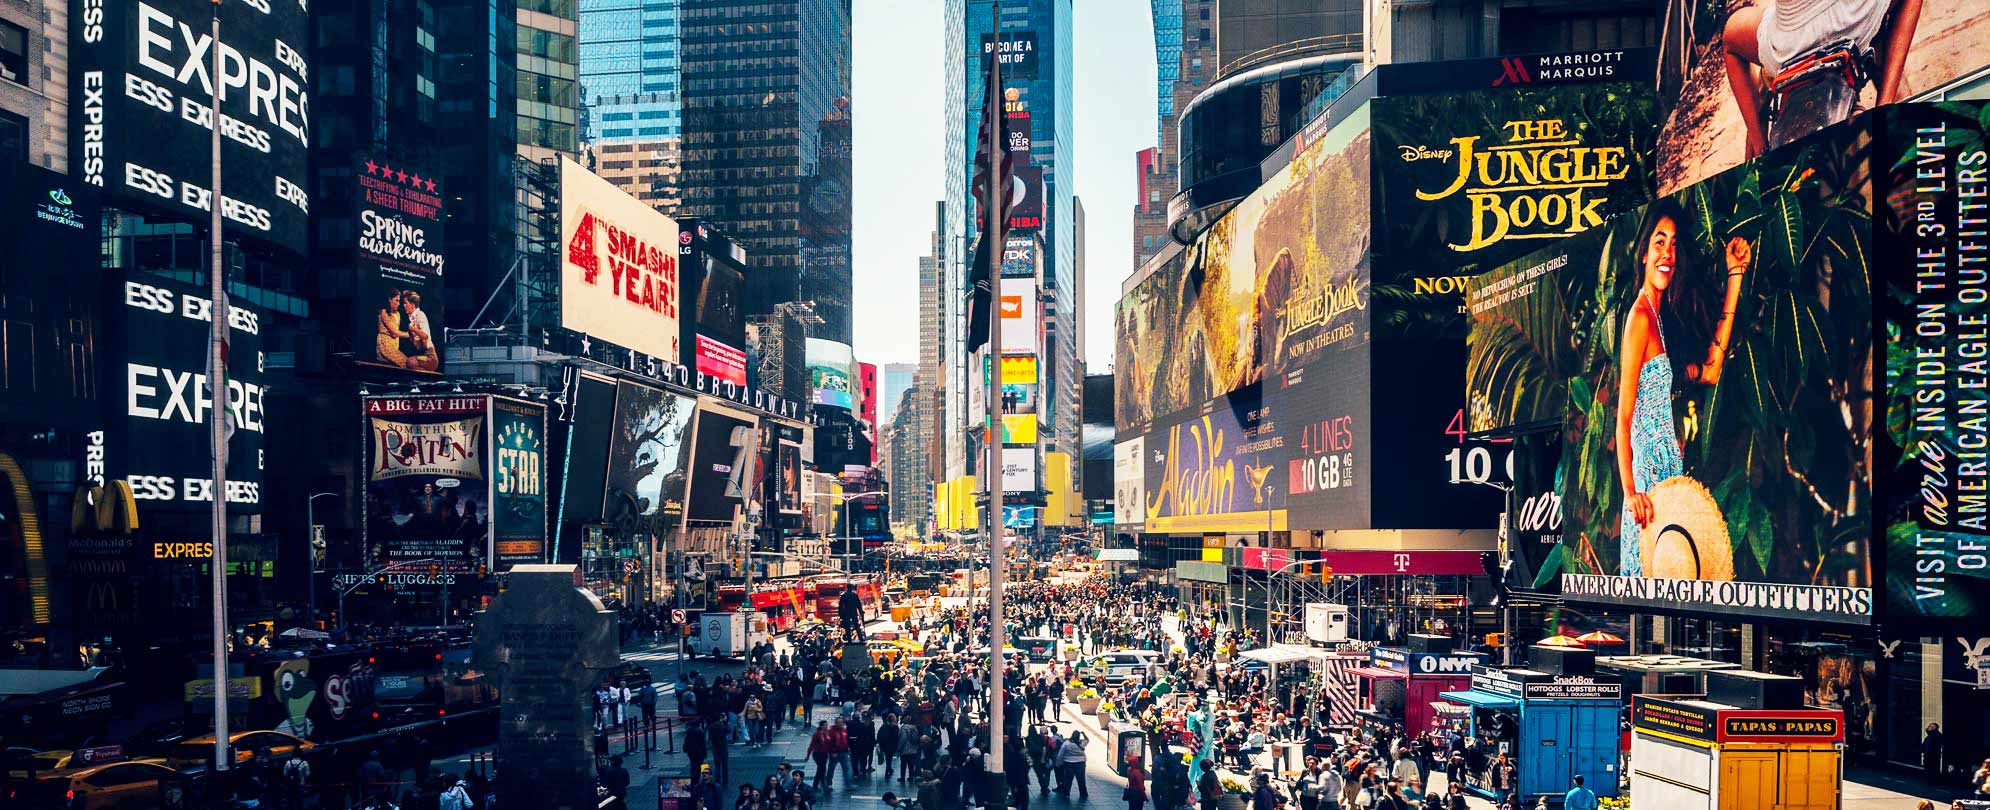 A crowded street in Times Square with large billboards advertising movies and Broadway musicals